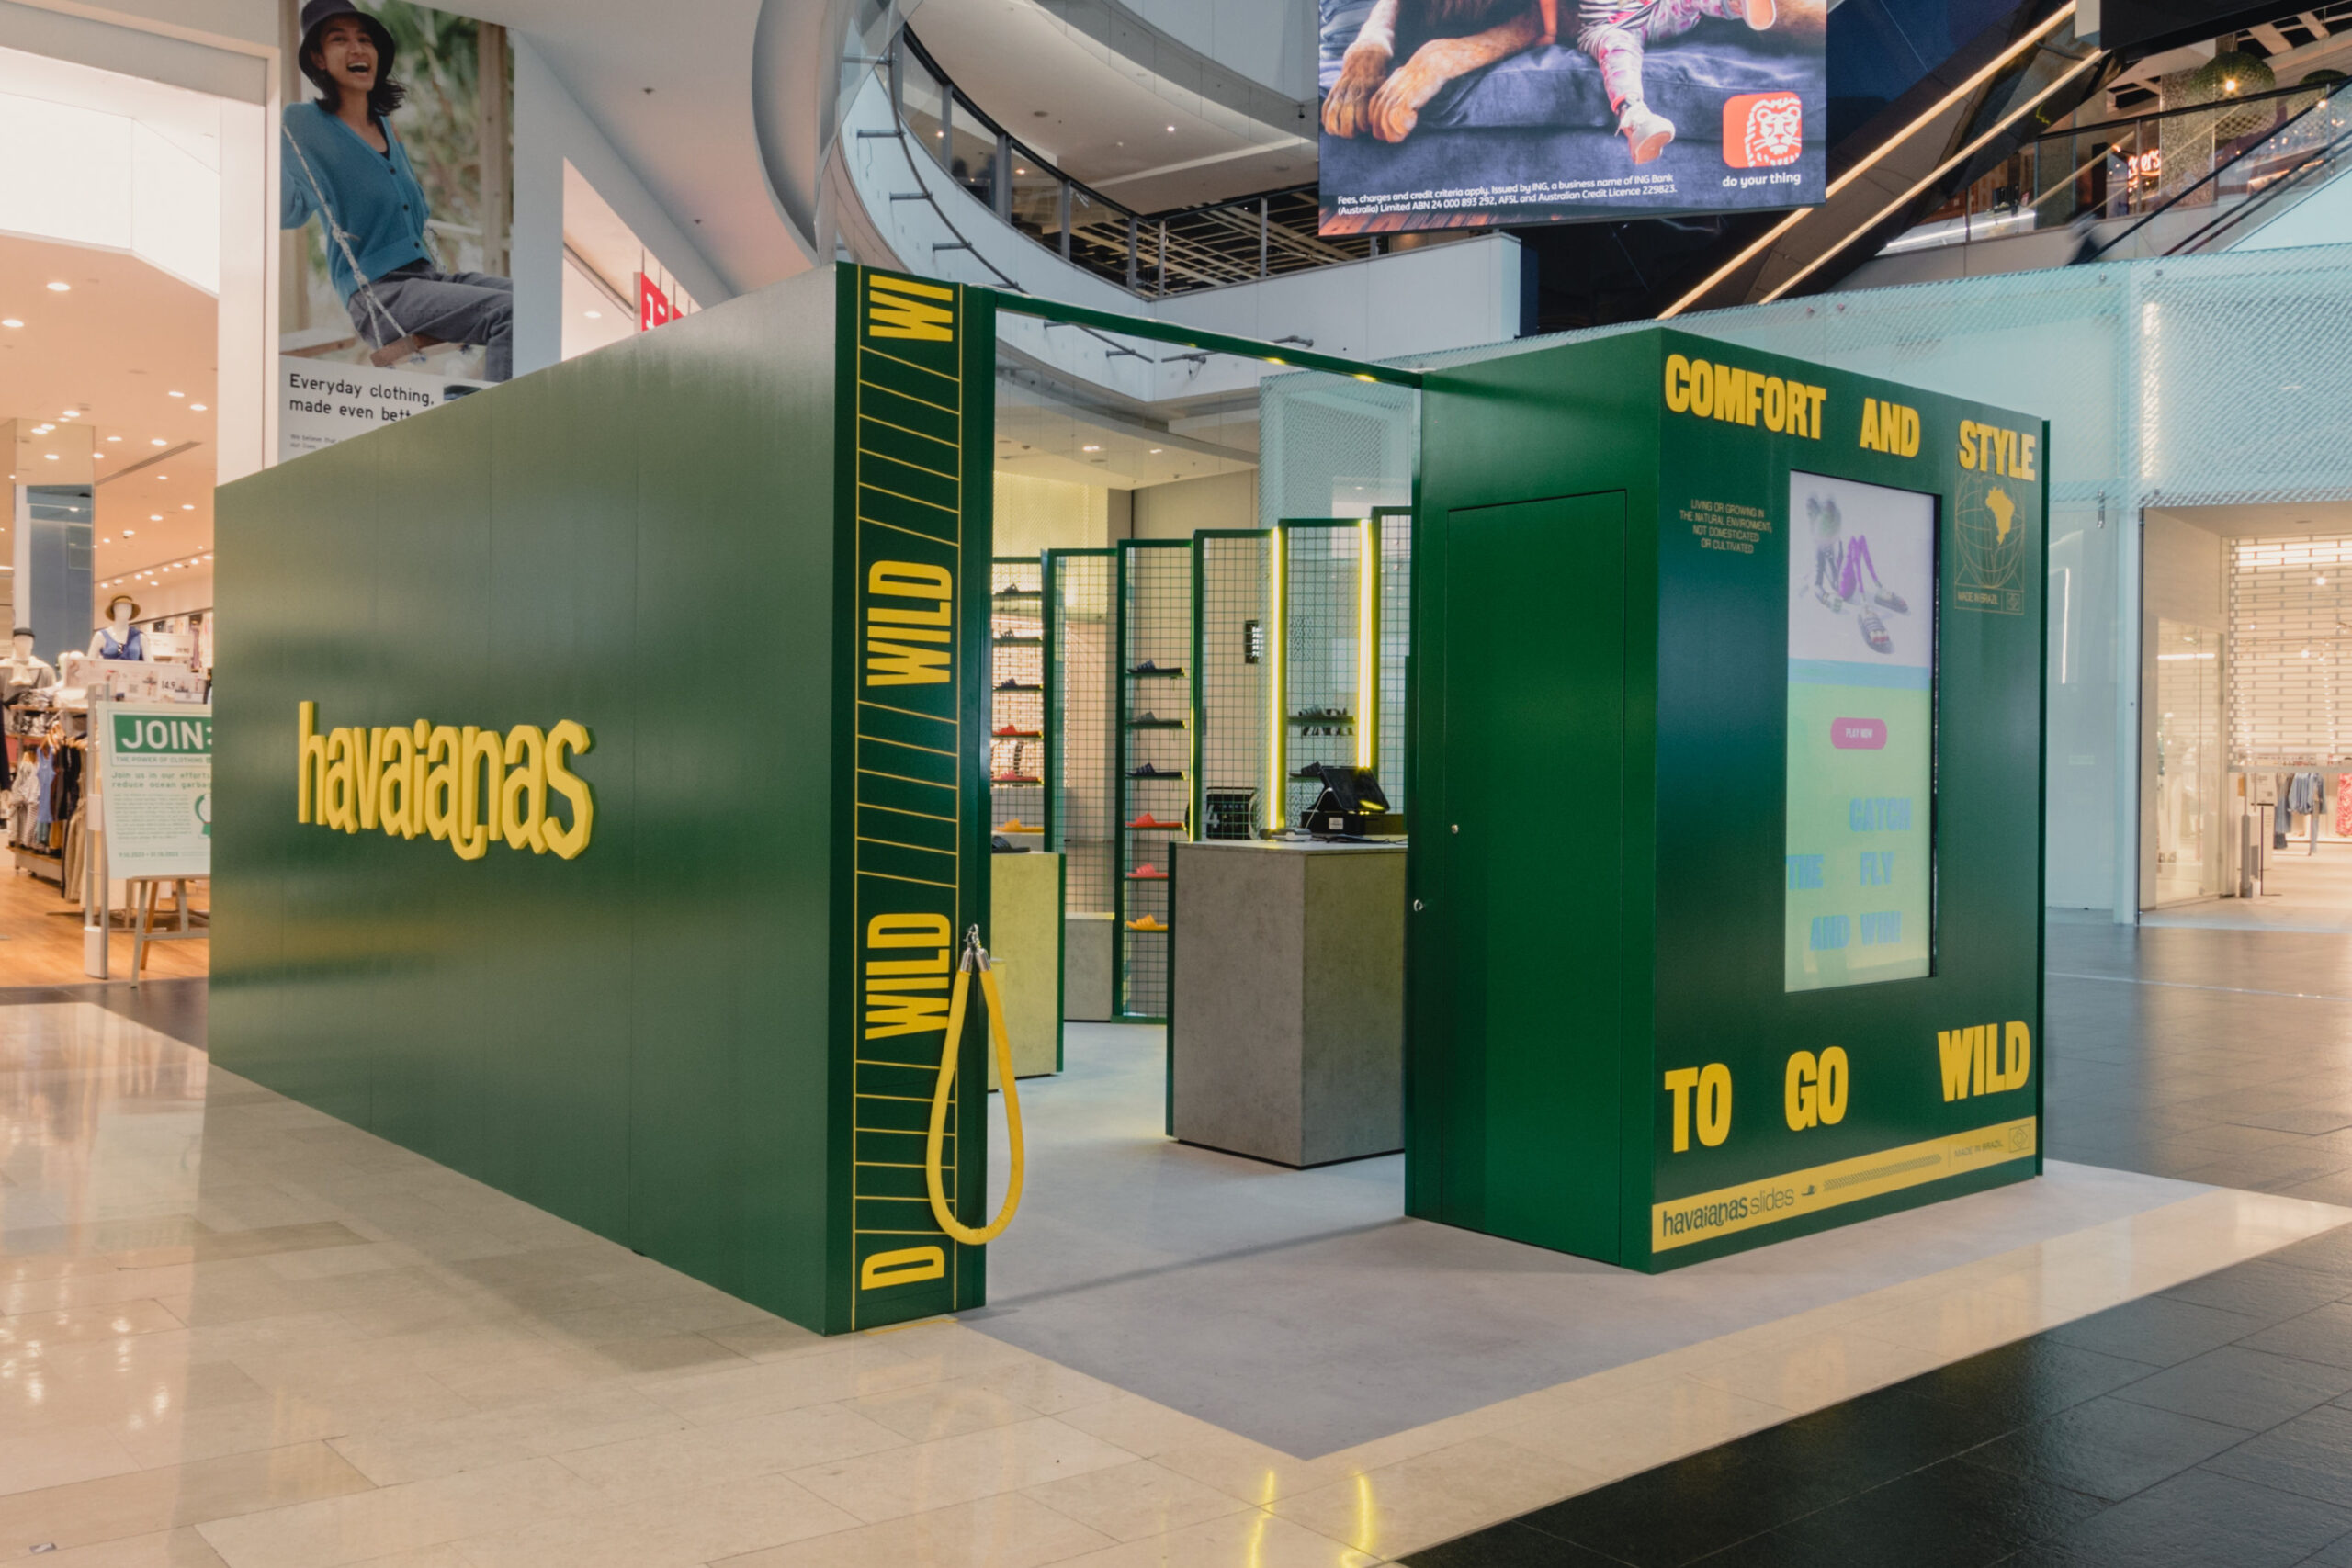 Angled View of Rear End Entrance to Pop-up Store. Green Display with Yellow Lettering of the Logo, Brand Messaging, and an Interactive Digital Display.